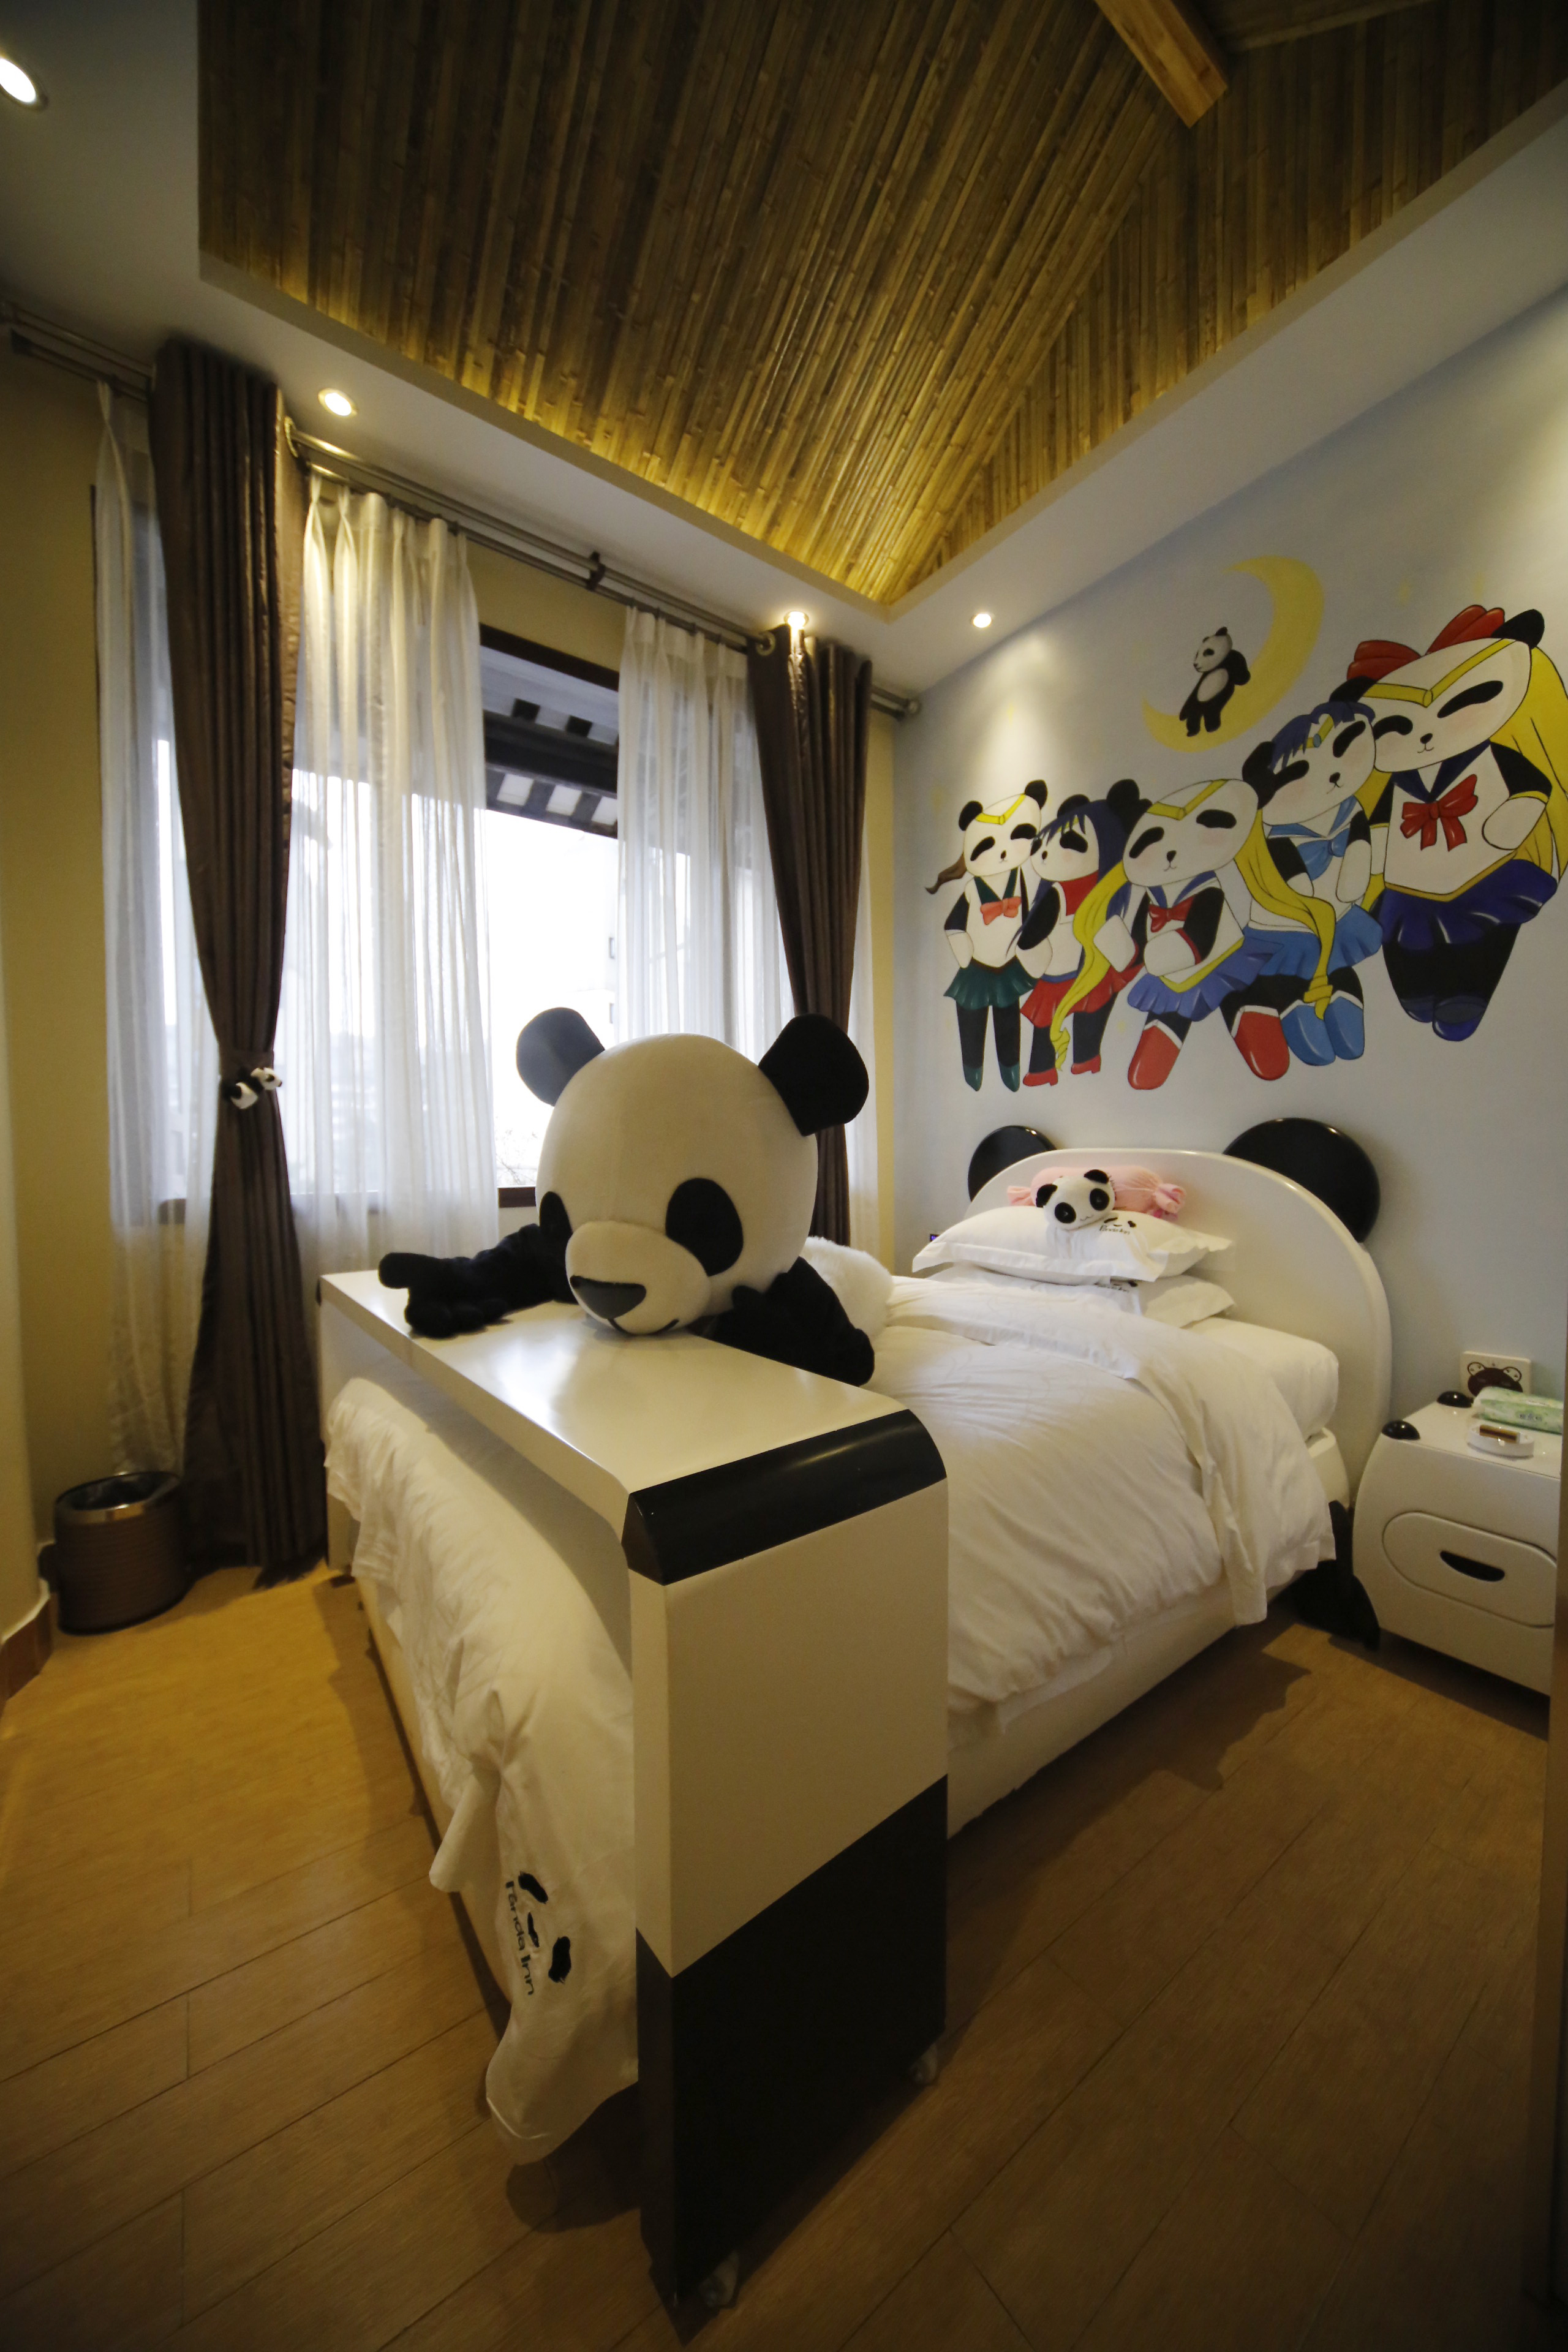 A panda toy on a bed in a room of a panda-themed hotel (AFP/Getty Images)